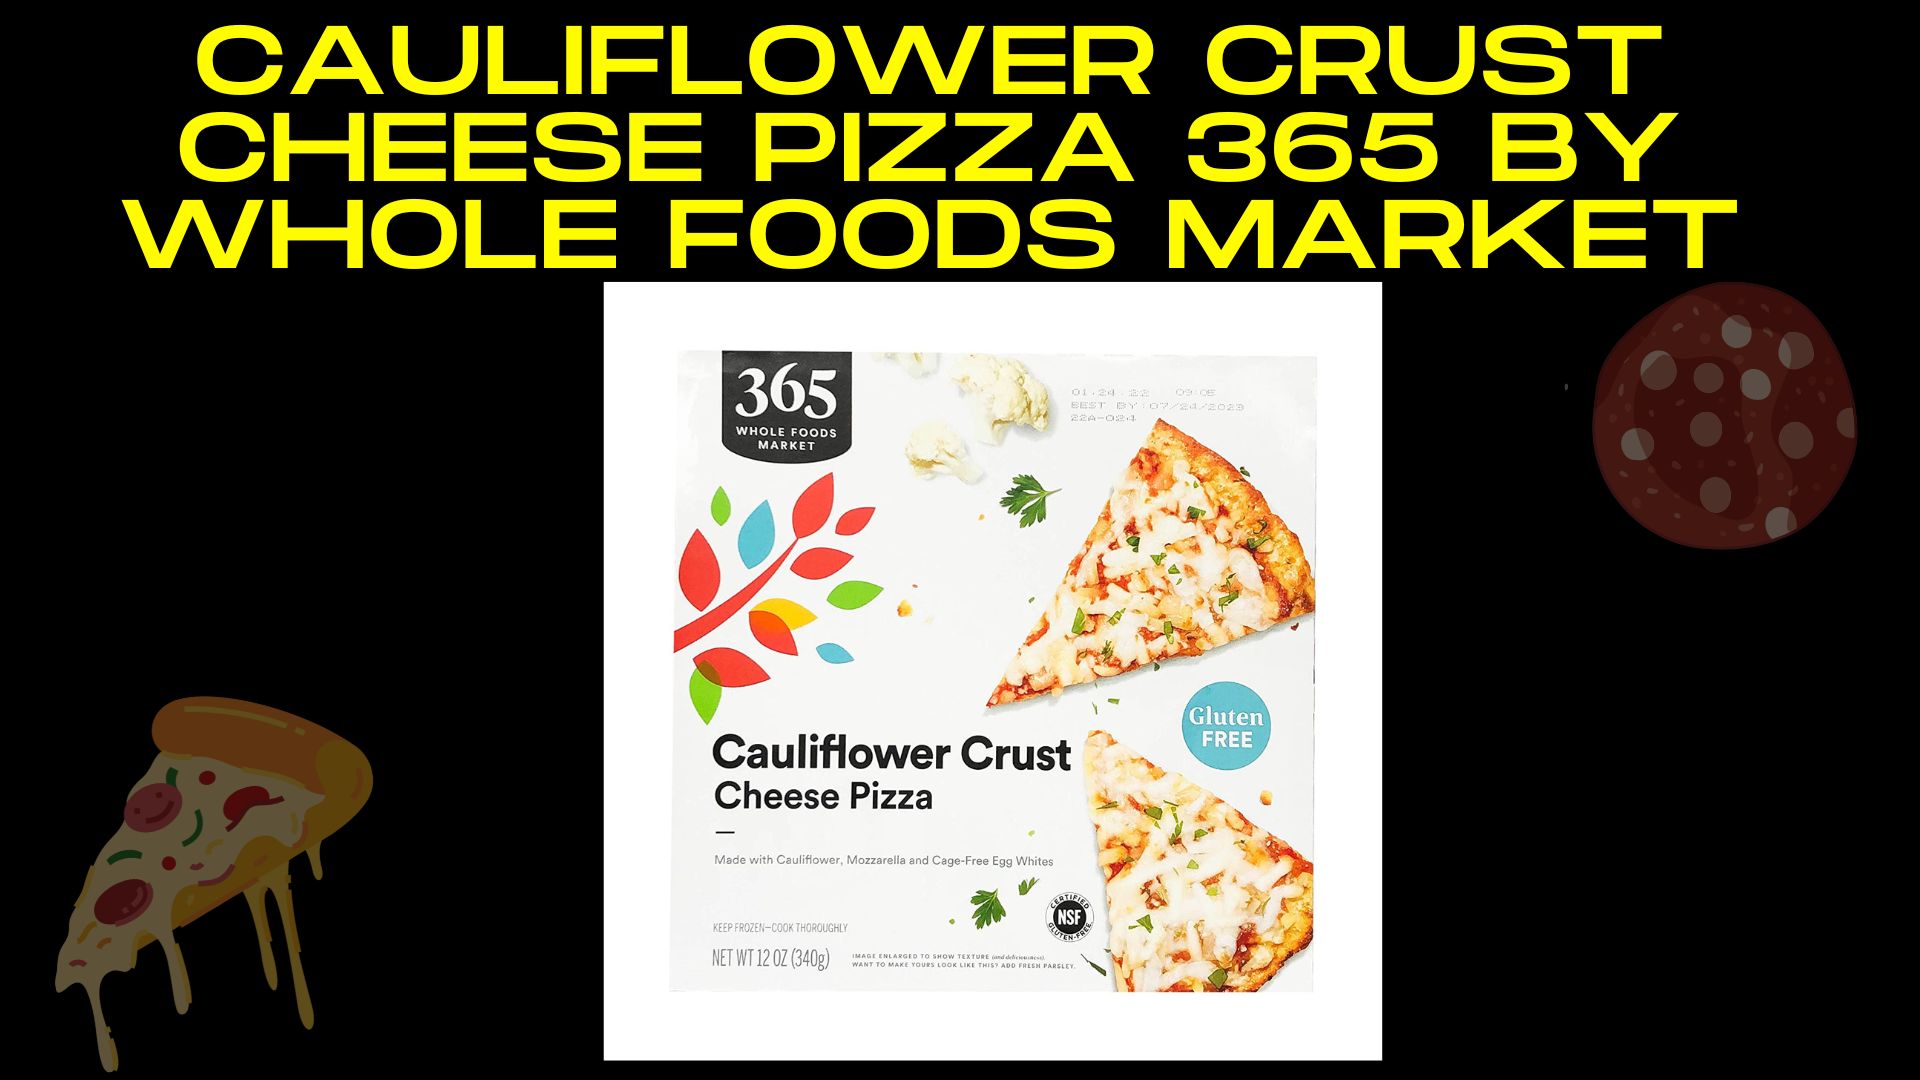 product image of Cauliflower Crust Cheese Pizza 365 by Whole Foods Market with black background